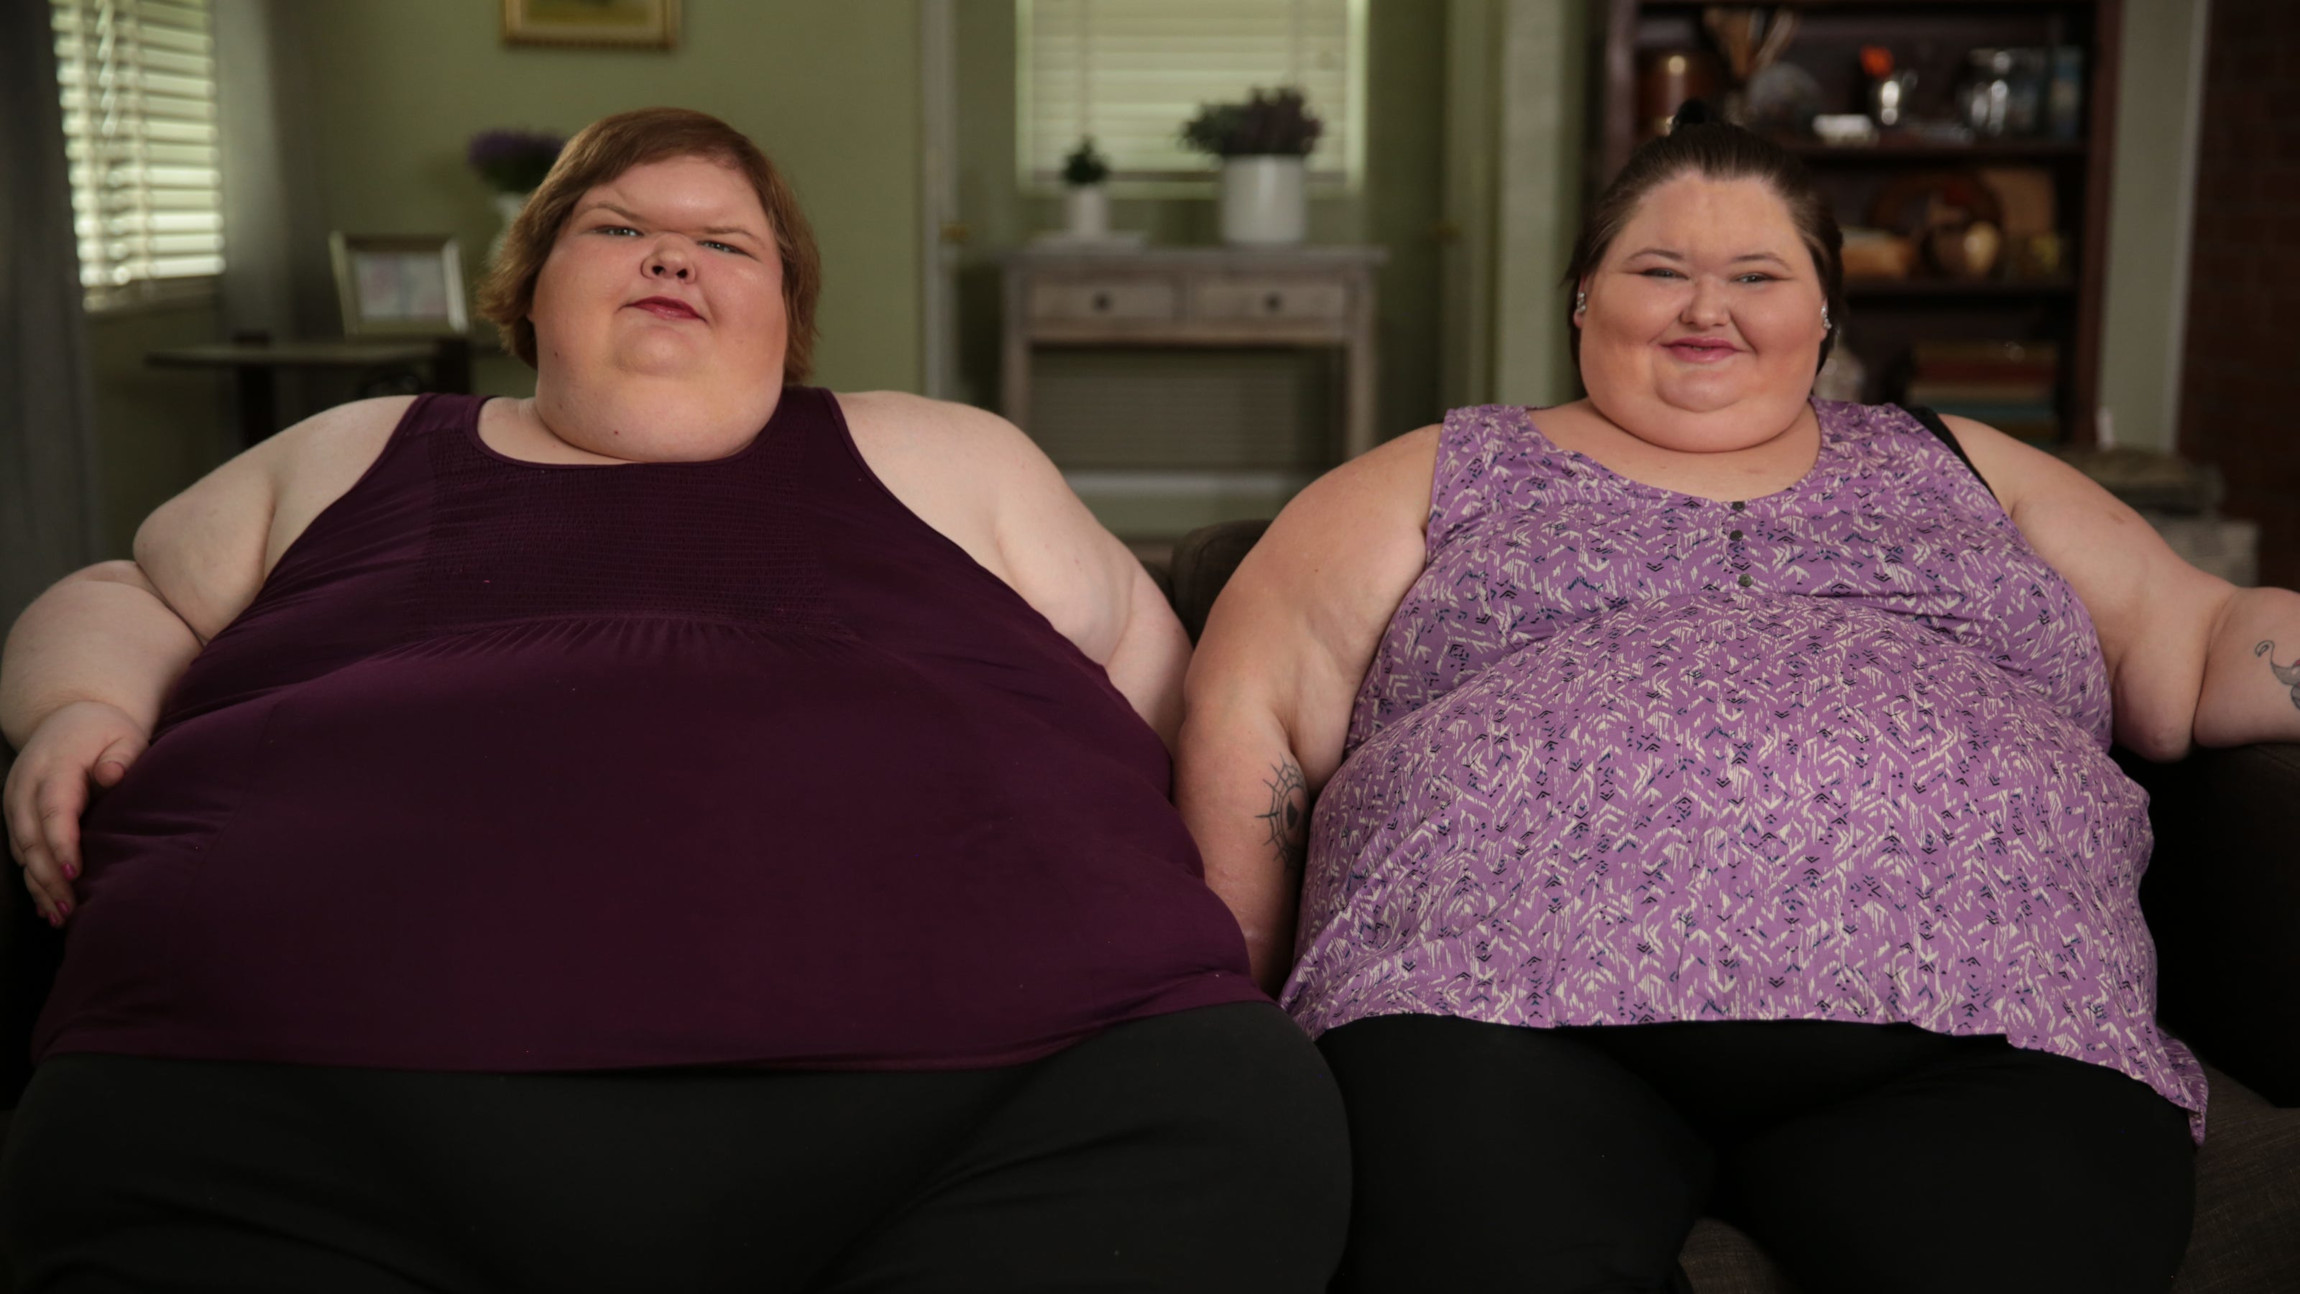 TLC's '1000lb Sisters' Check out what happened to the Slaton sisters